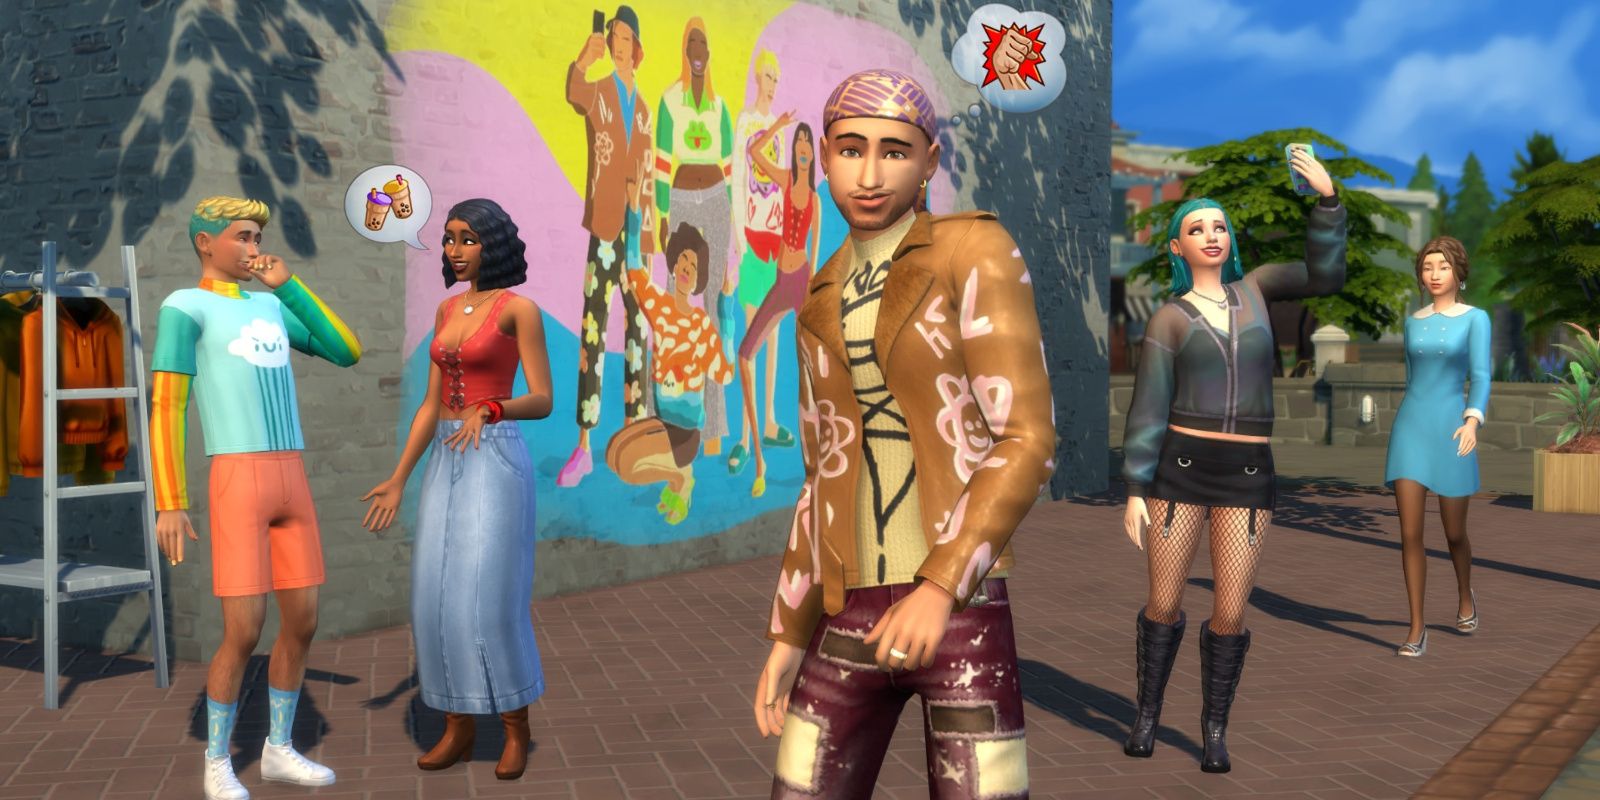 Teen sims in the new High School Years expansion of Sims 4